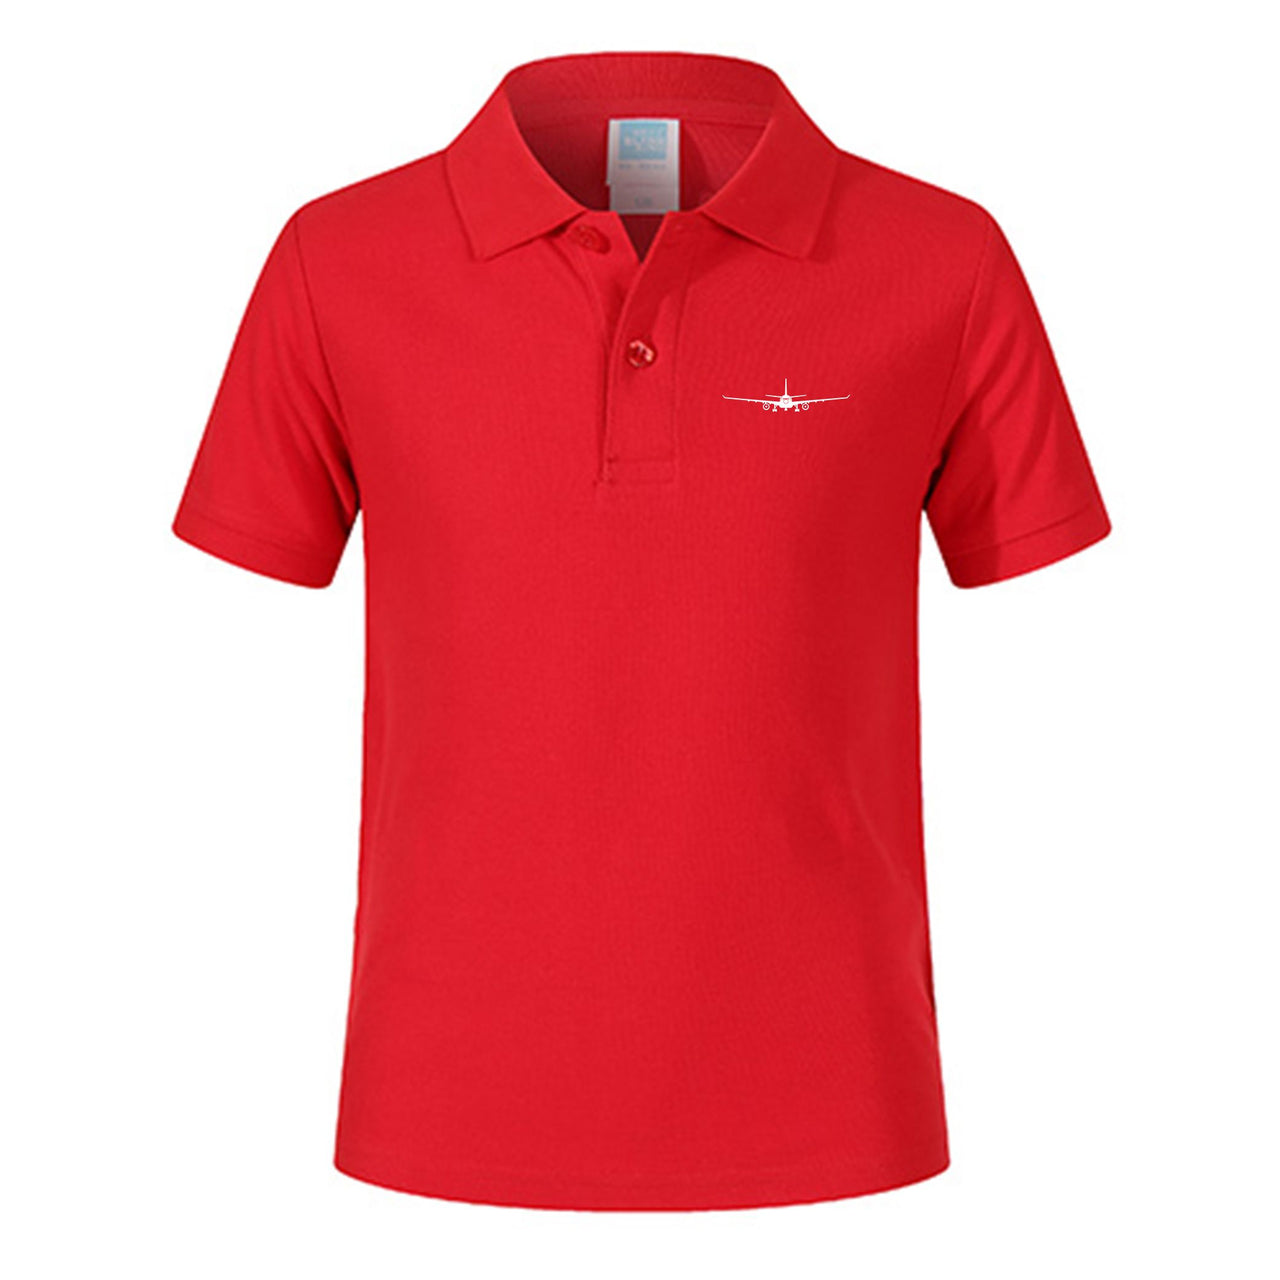 Airbus A330 Silhouette Designed Children Polo T-Shirts